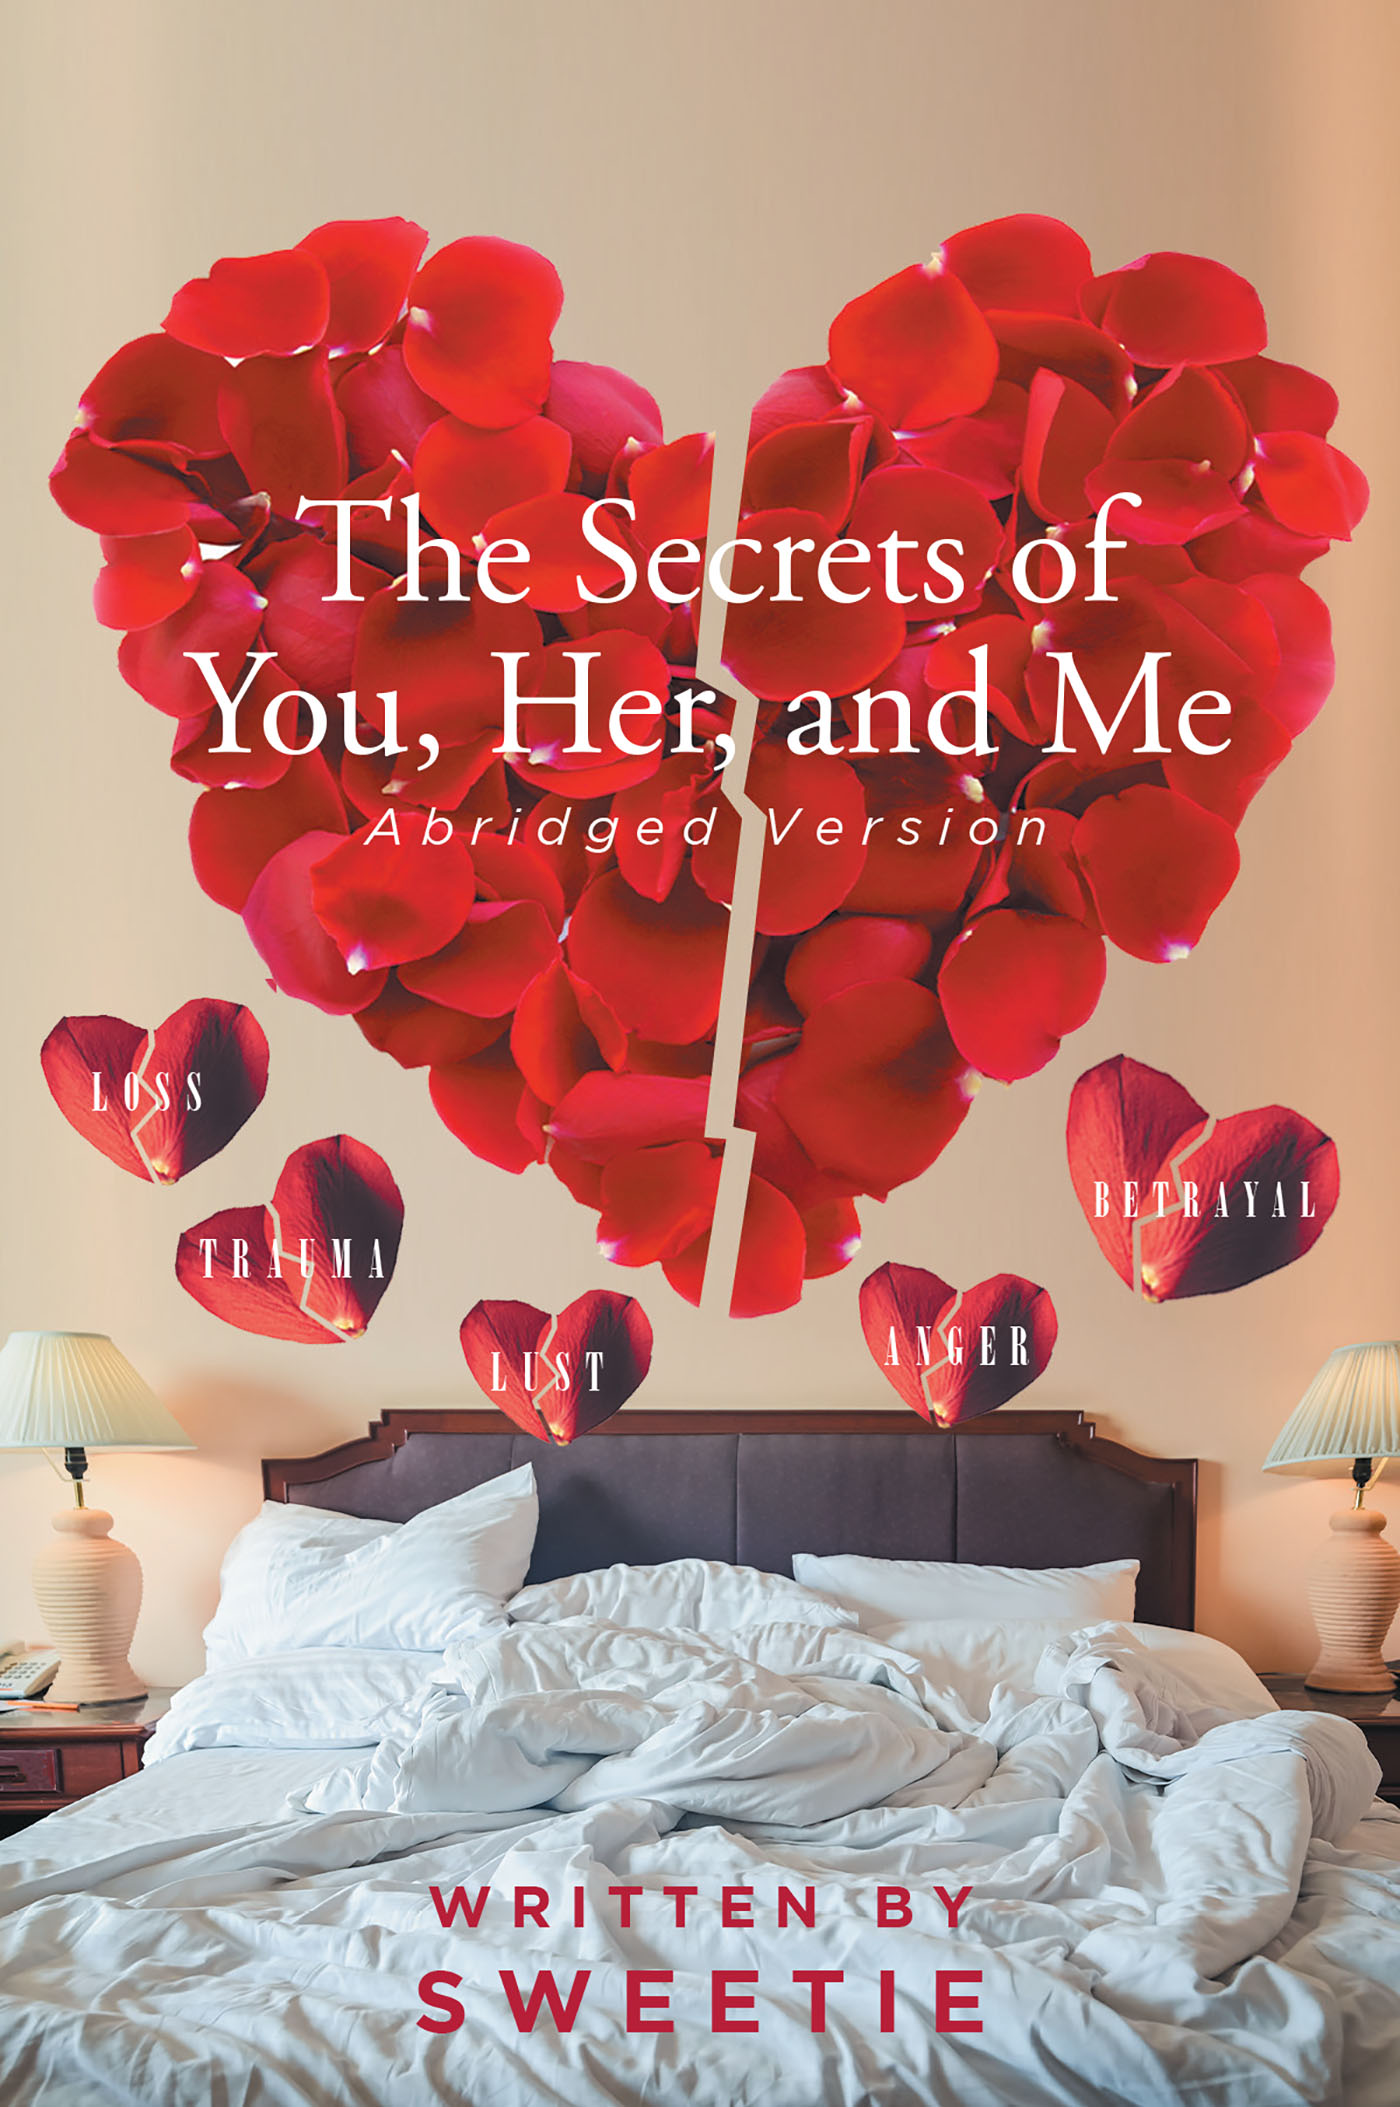 Sweetie’s New Book, "The Secrets of You, Her, and Me: Abridged Version," is the Salacious Story of an Adulterous Love Triangle That Proves to be the Downfall of One Man